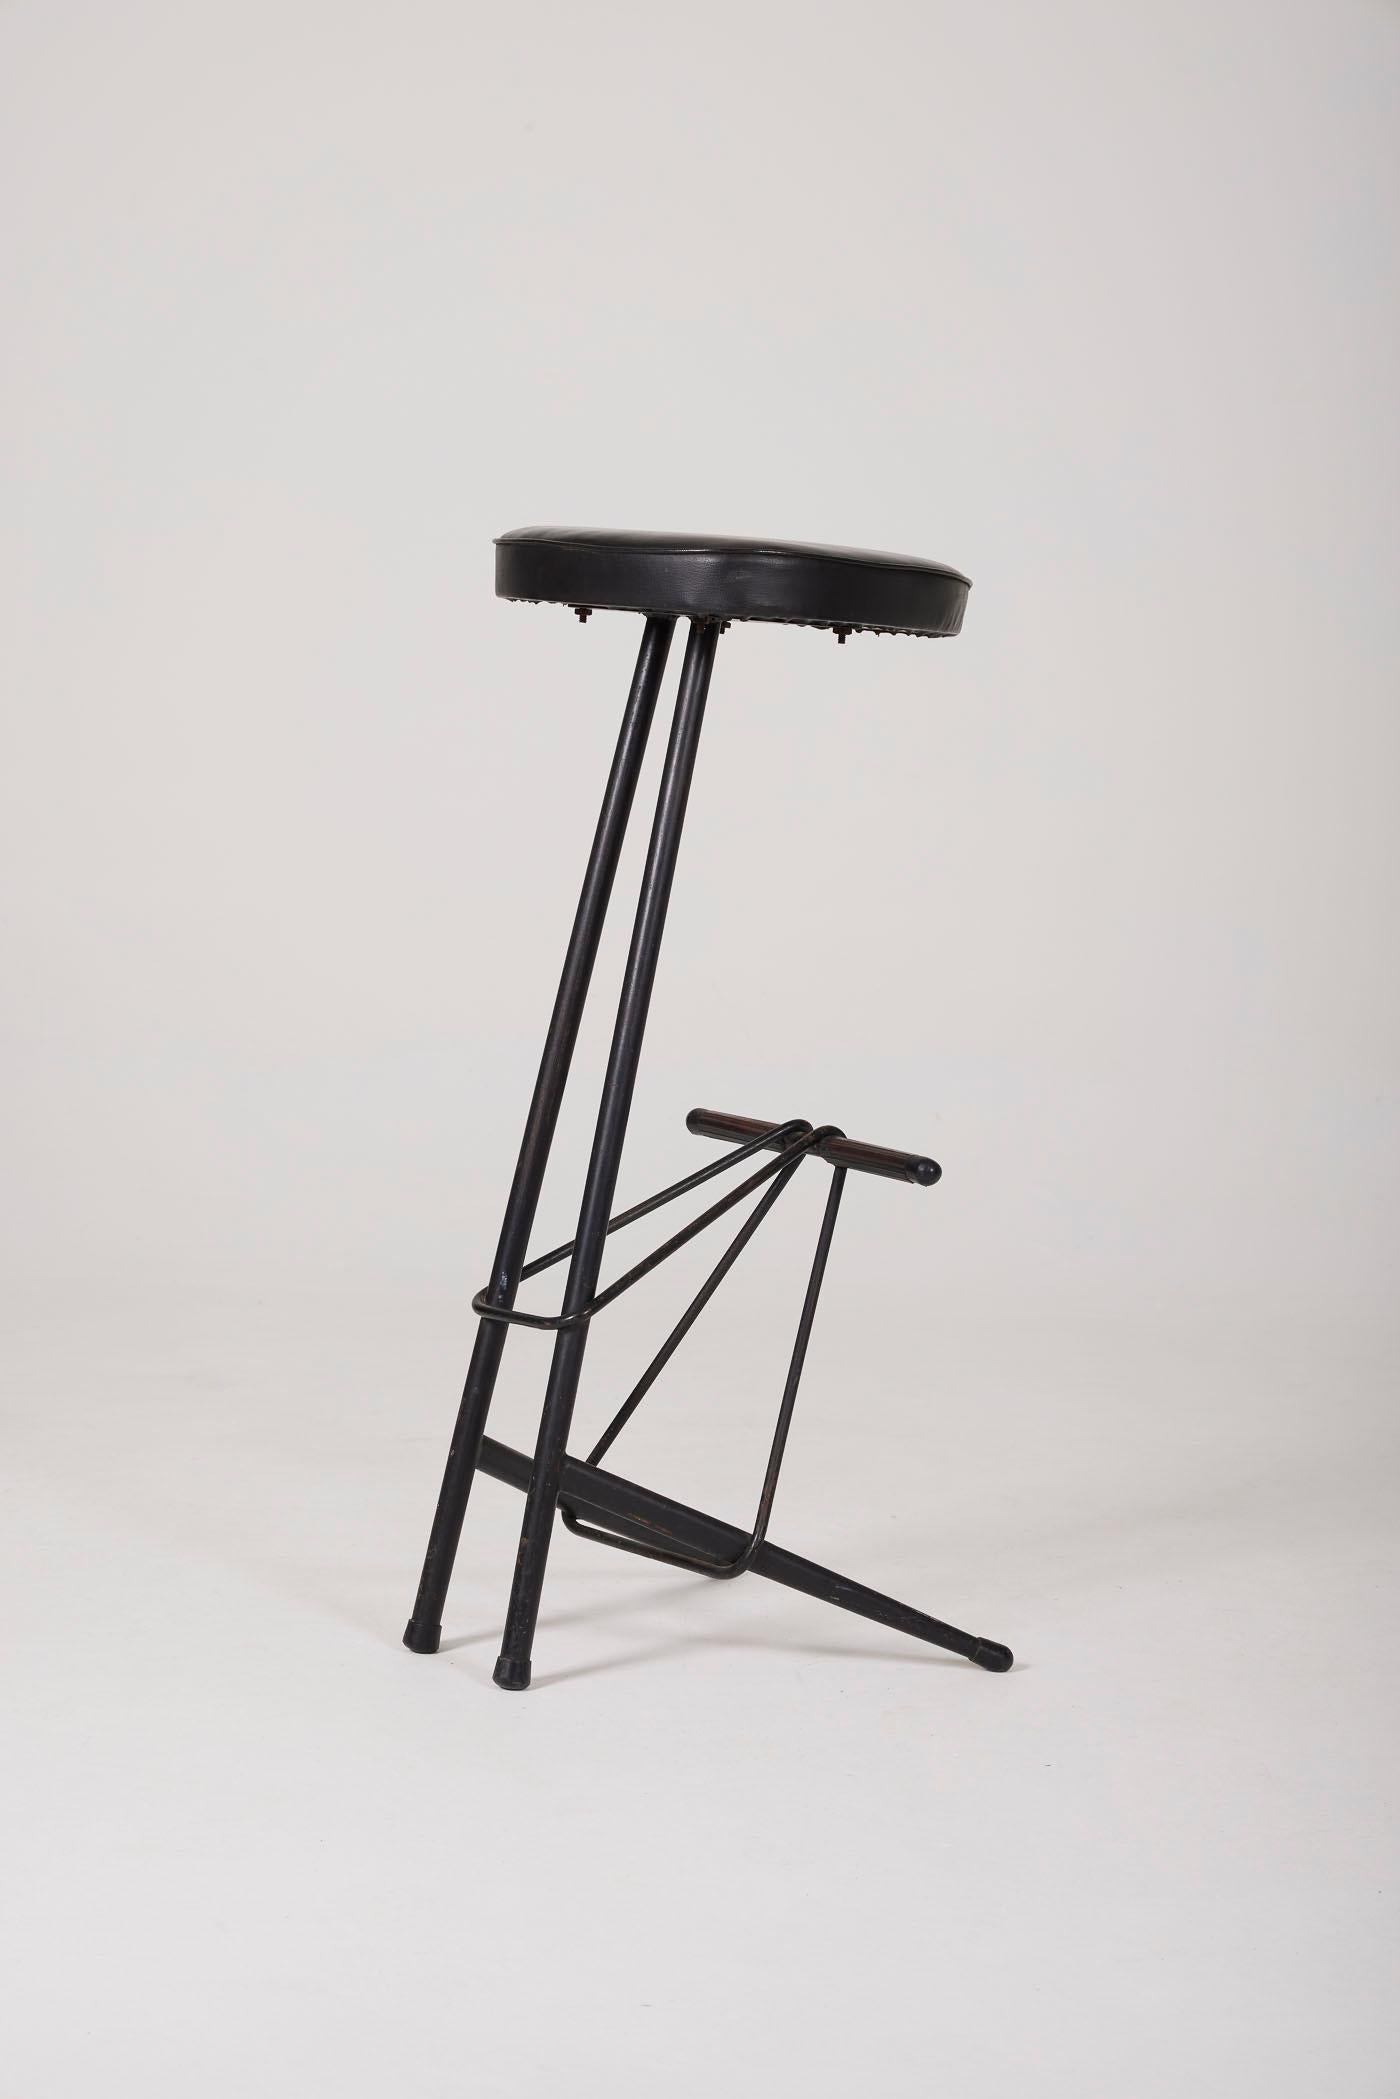 High stool by Belgian designer Willy Van der Meeren (1923-2002) for Tubax, 1950s. The base is in black lacquered metal, and the seat is in black faux leather. In very good condition.
DV458